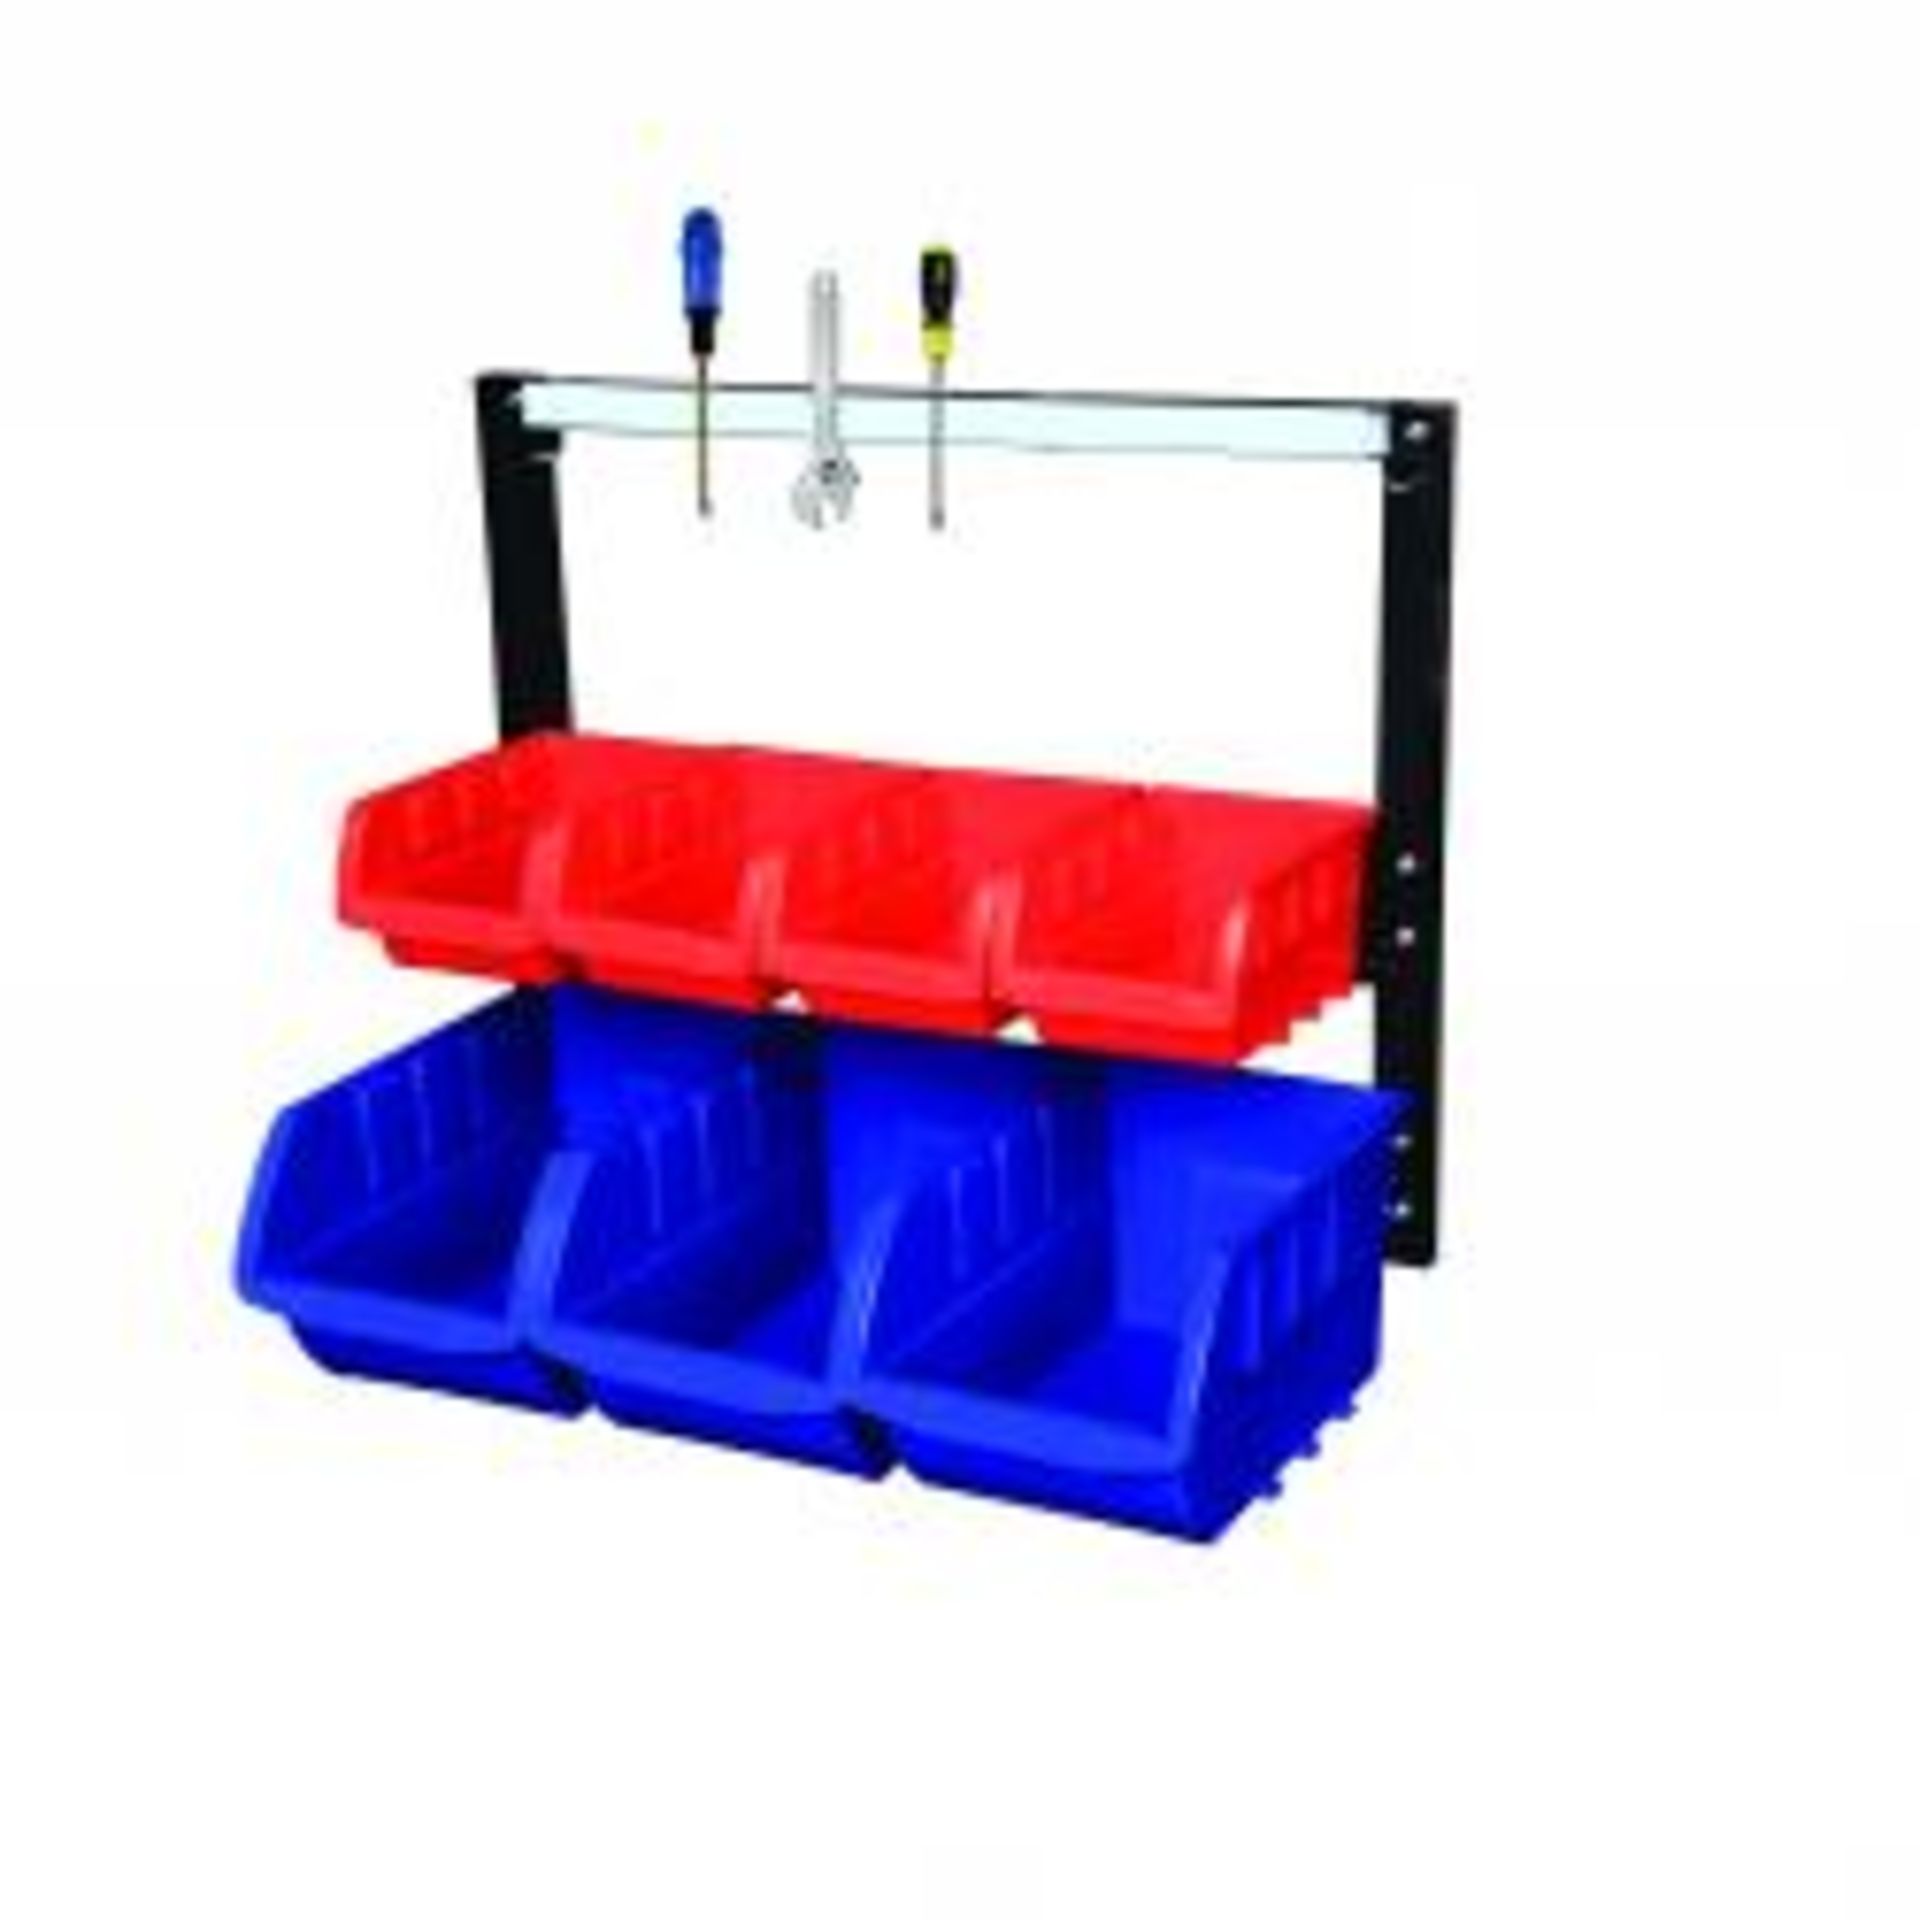 2 X BRAND NEW BIN RACK WITH 7 BINS AND MAGNETIC TOOL STRIP RRP £60 EACH GIL07Z